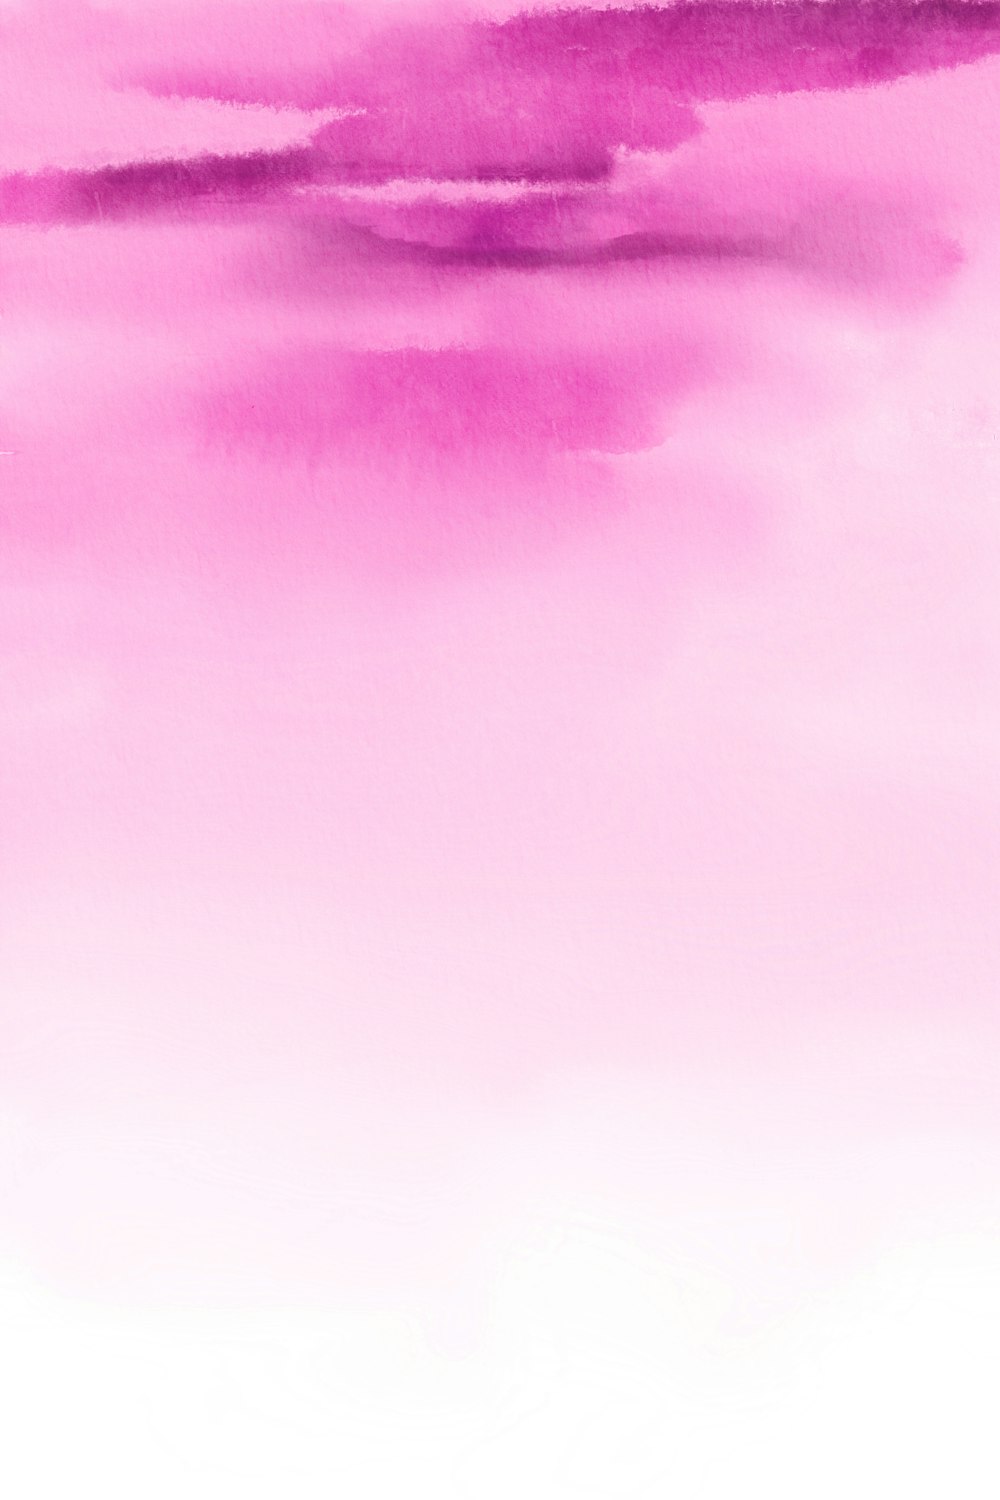 a painting of a pink sky with clouds